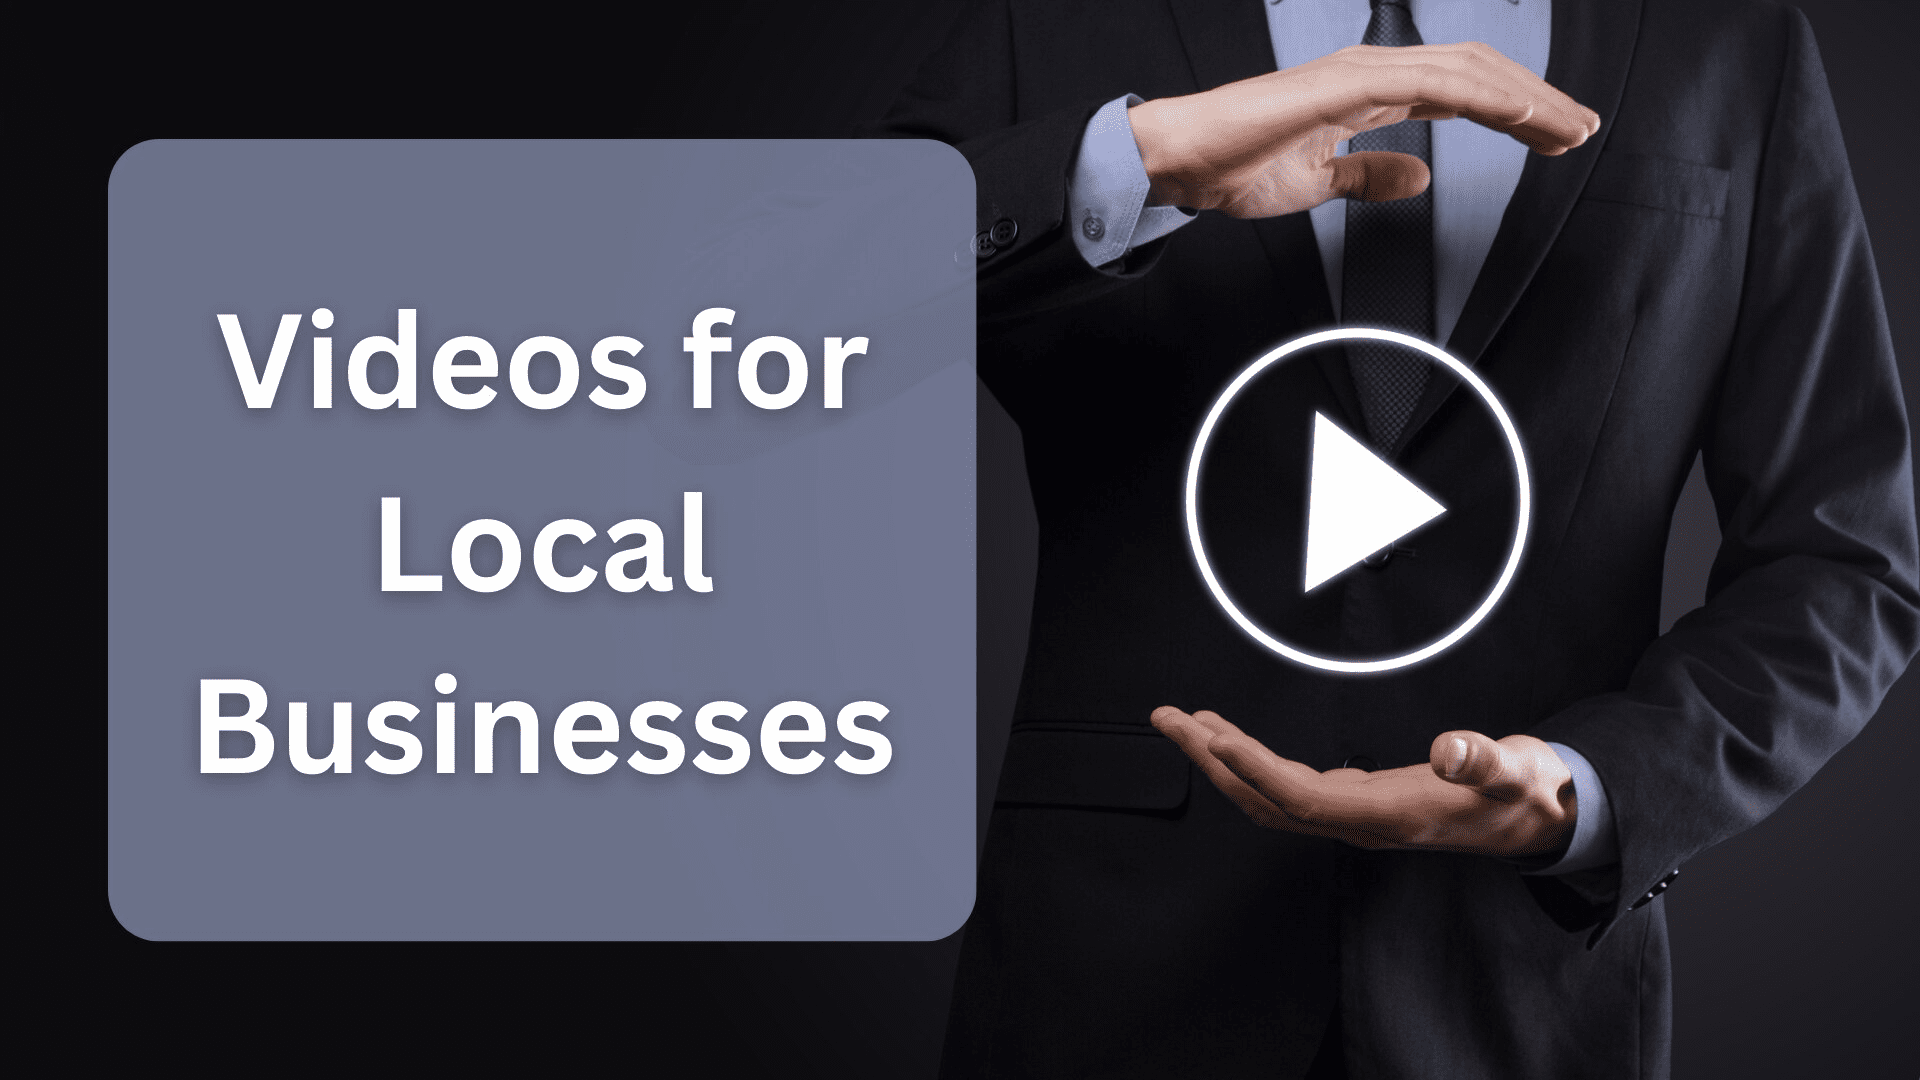 Videos for Local Businesses